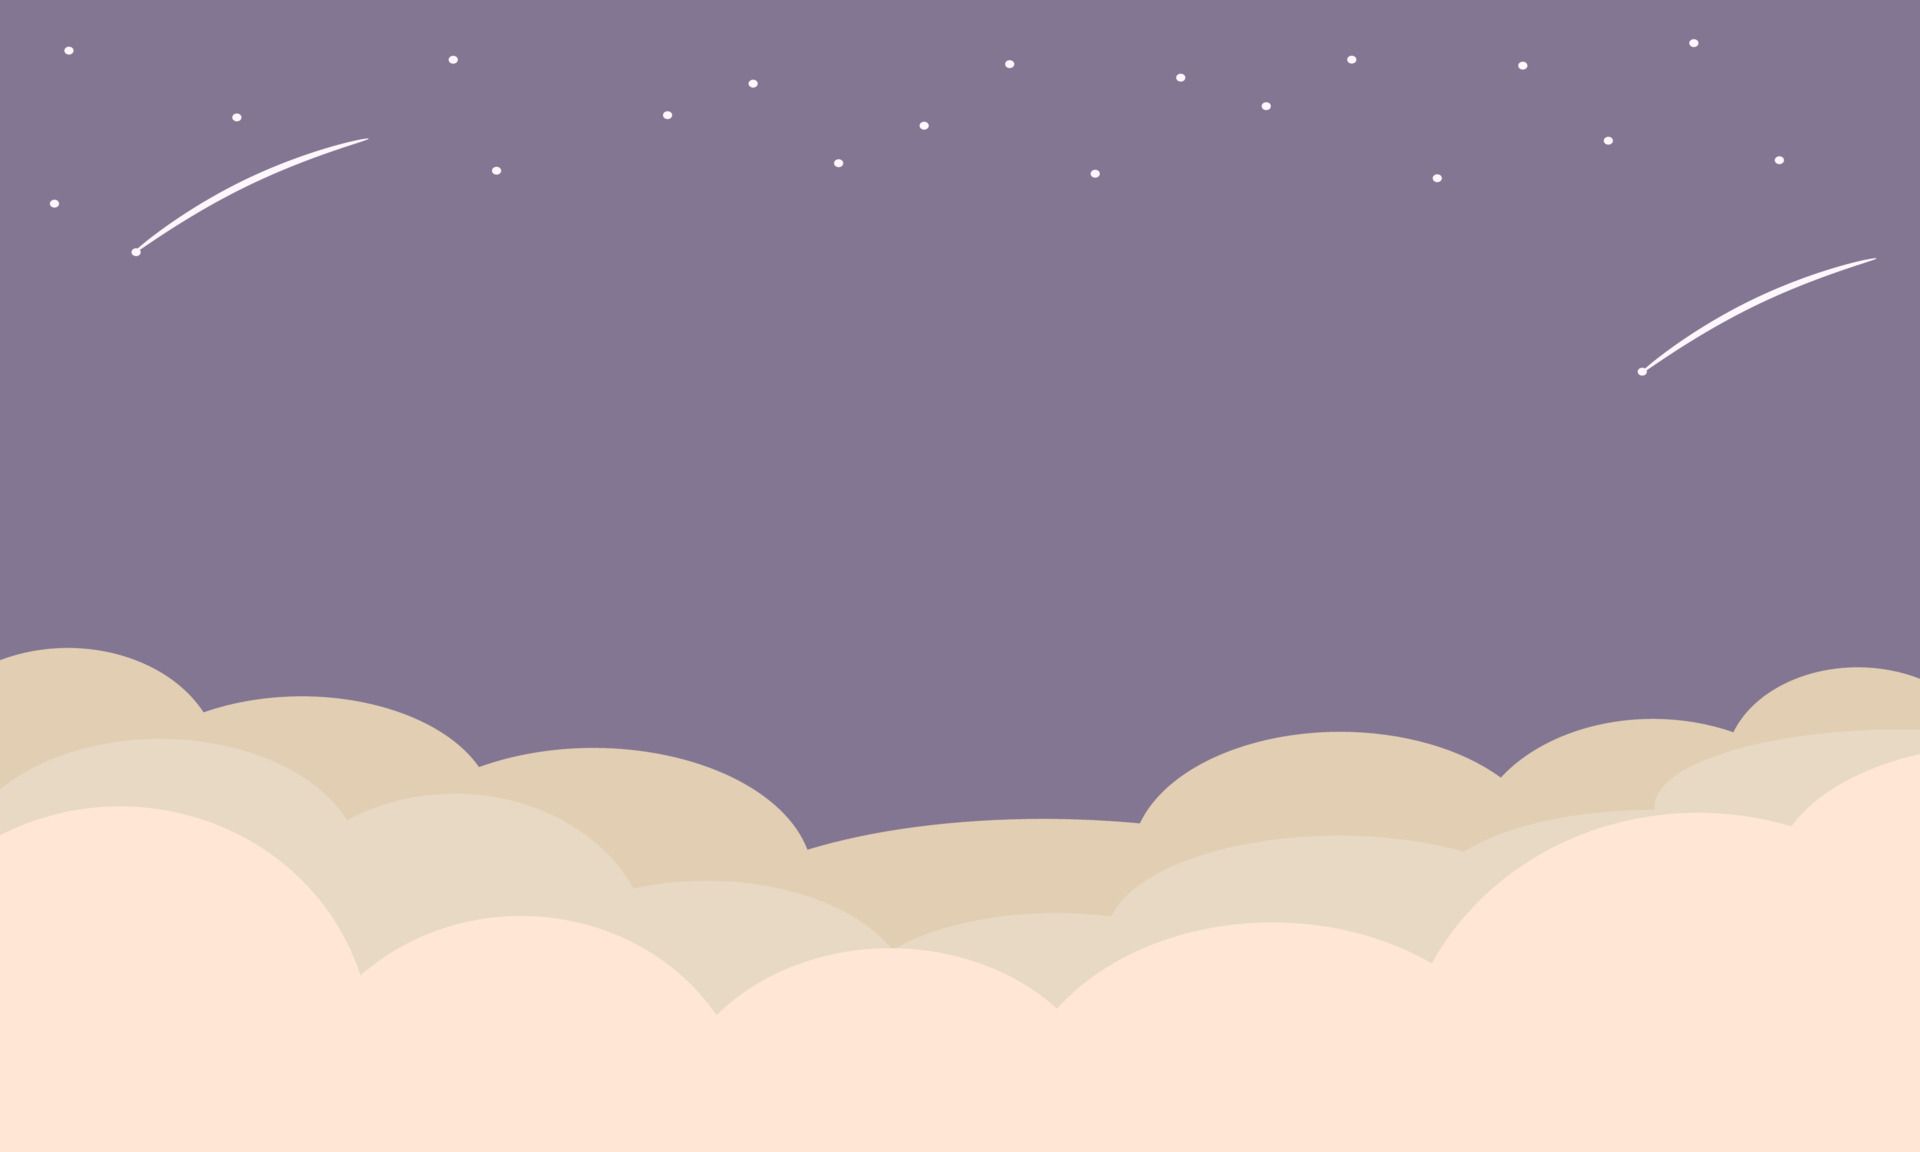  Design Hintergrundbild 1920x1152. aesthetic background. illustrations of clouds, stars and sky with purple gradations. suitable for wallpaper, presentation background, and various other design needs